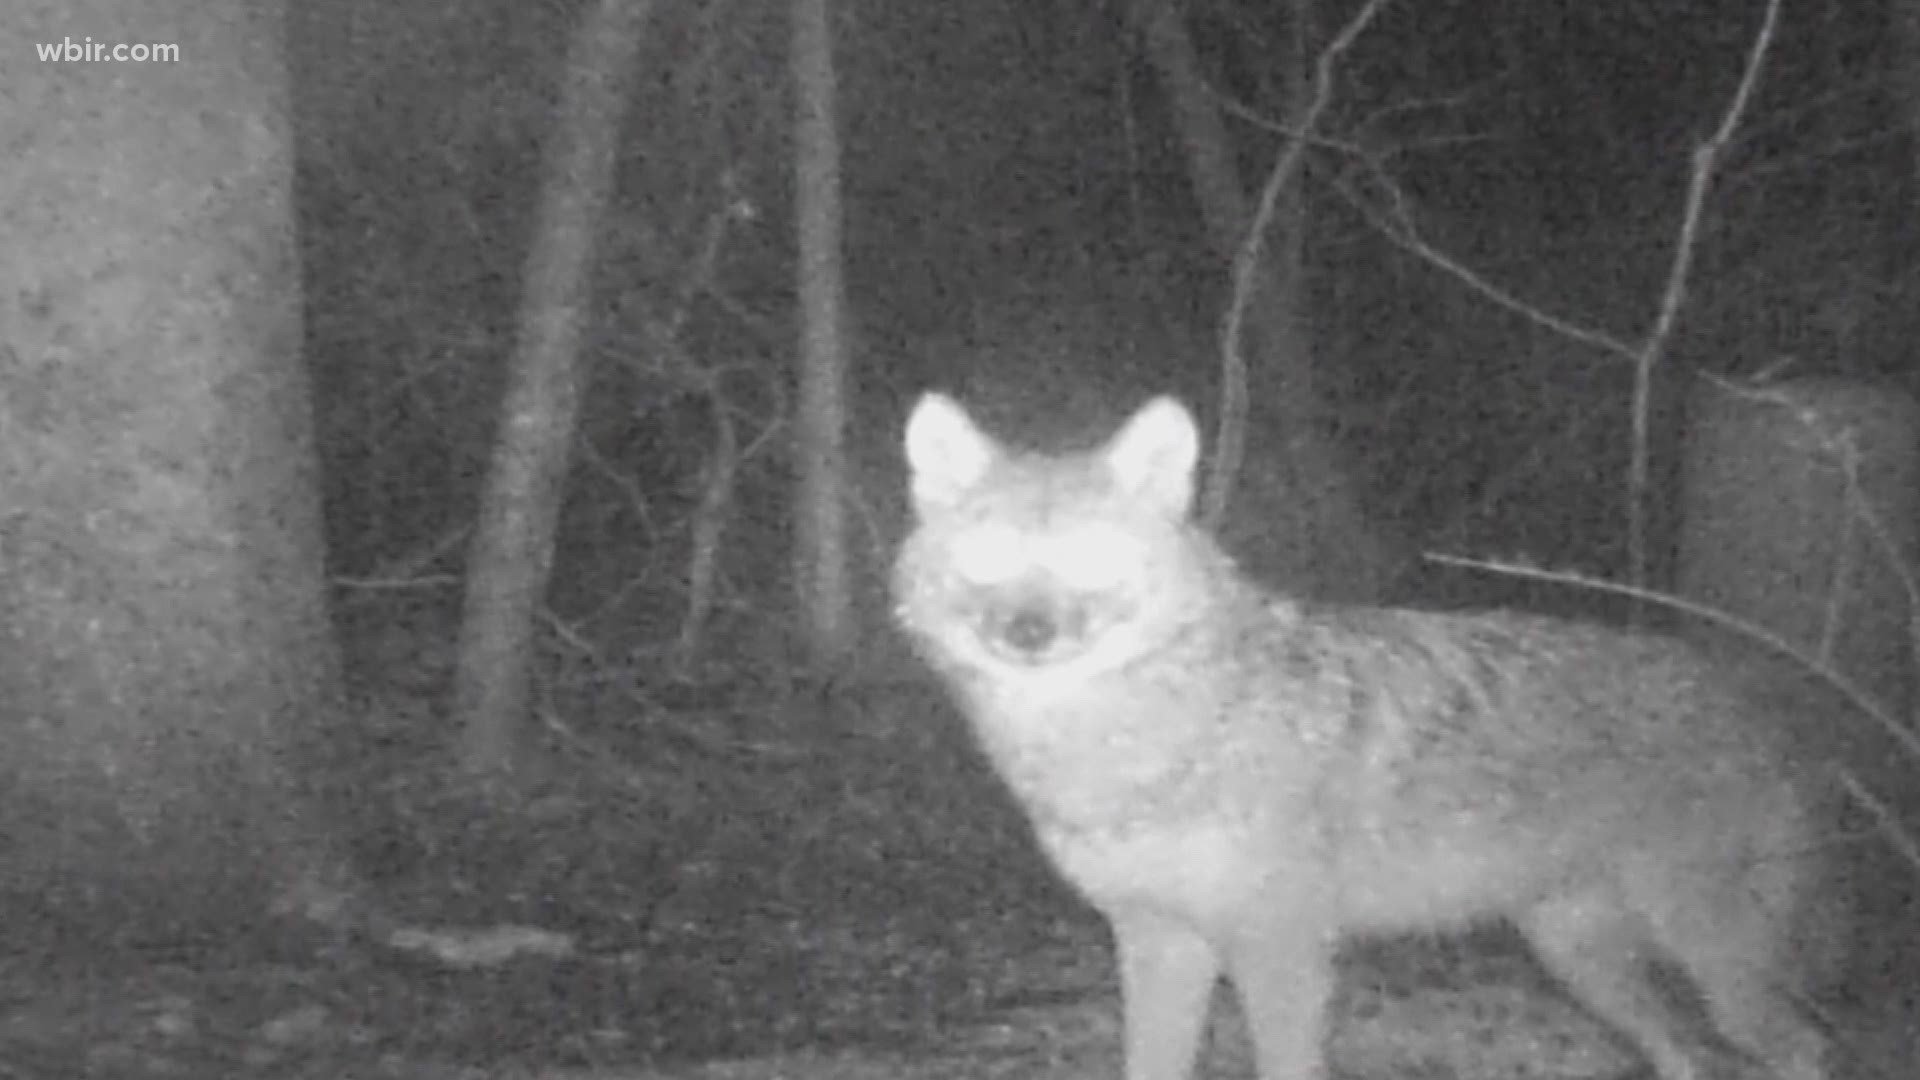 Coyotes are out and about in East Tennessee, as they come out during their mating season.